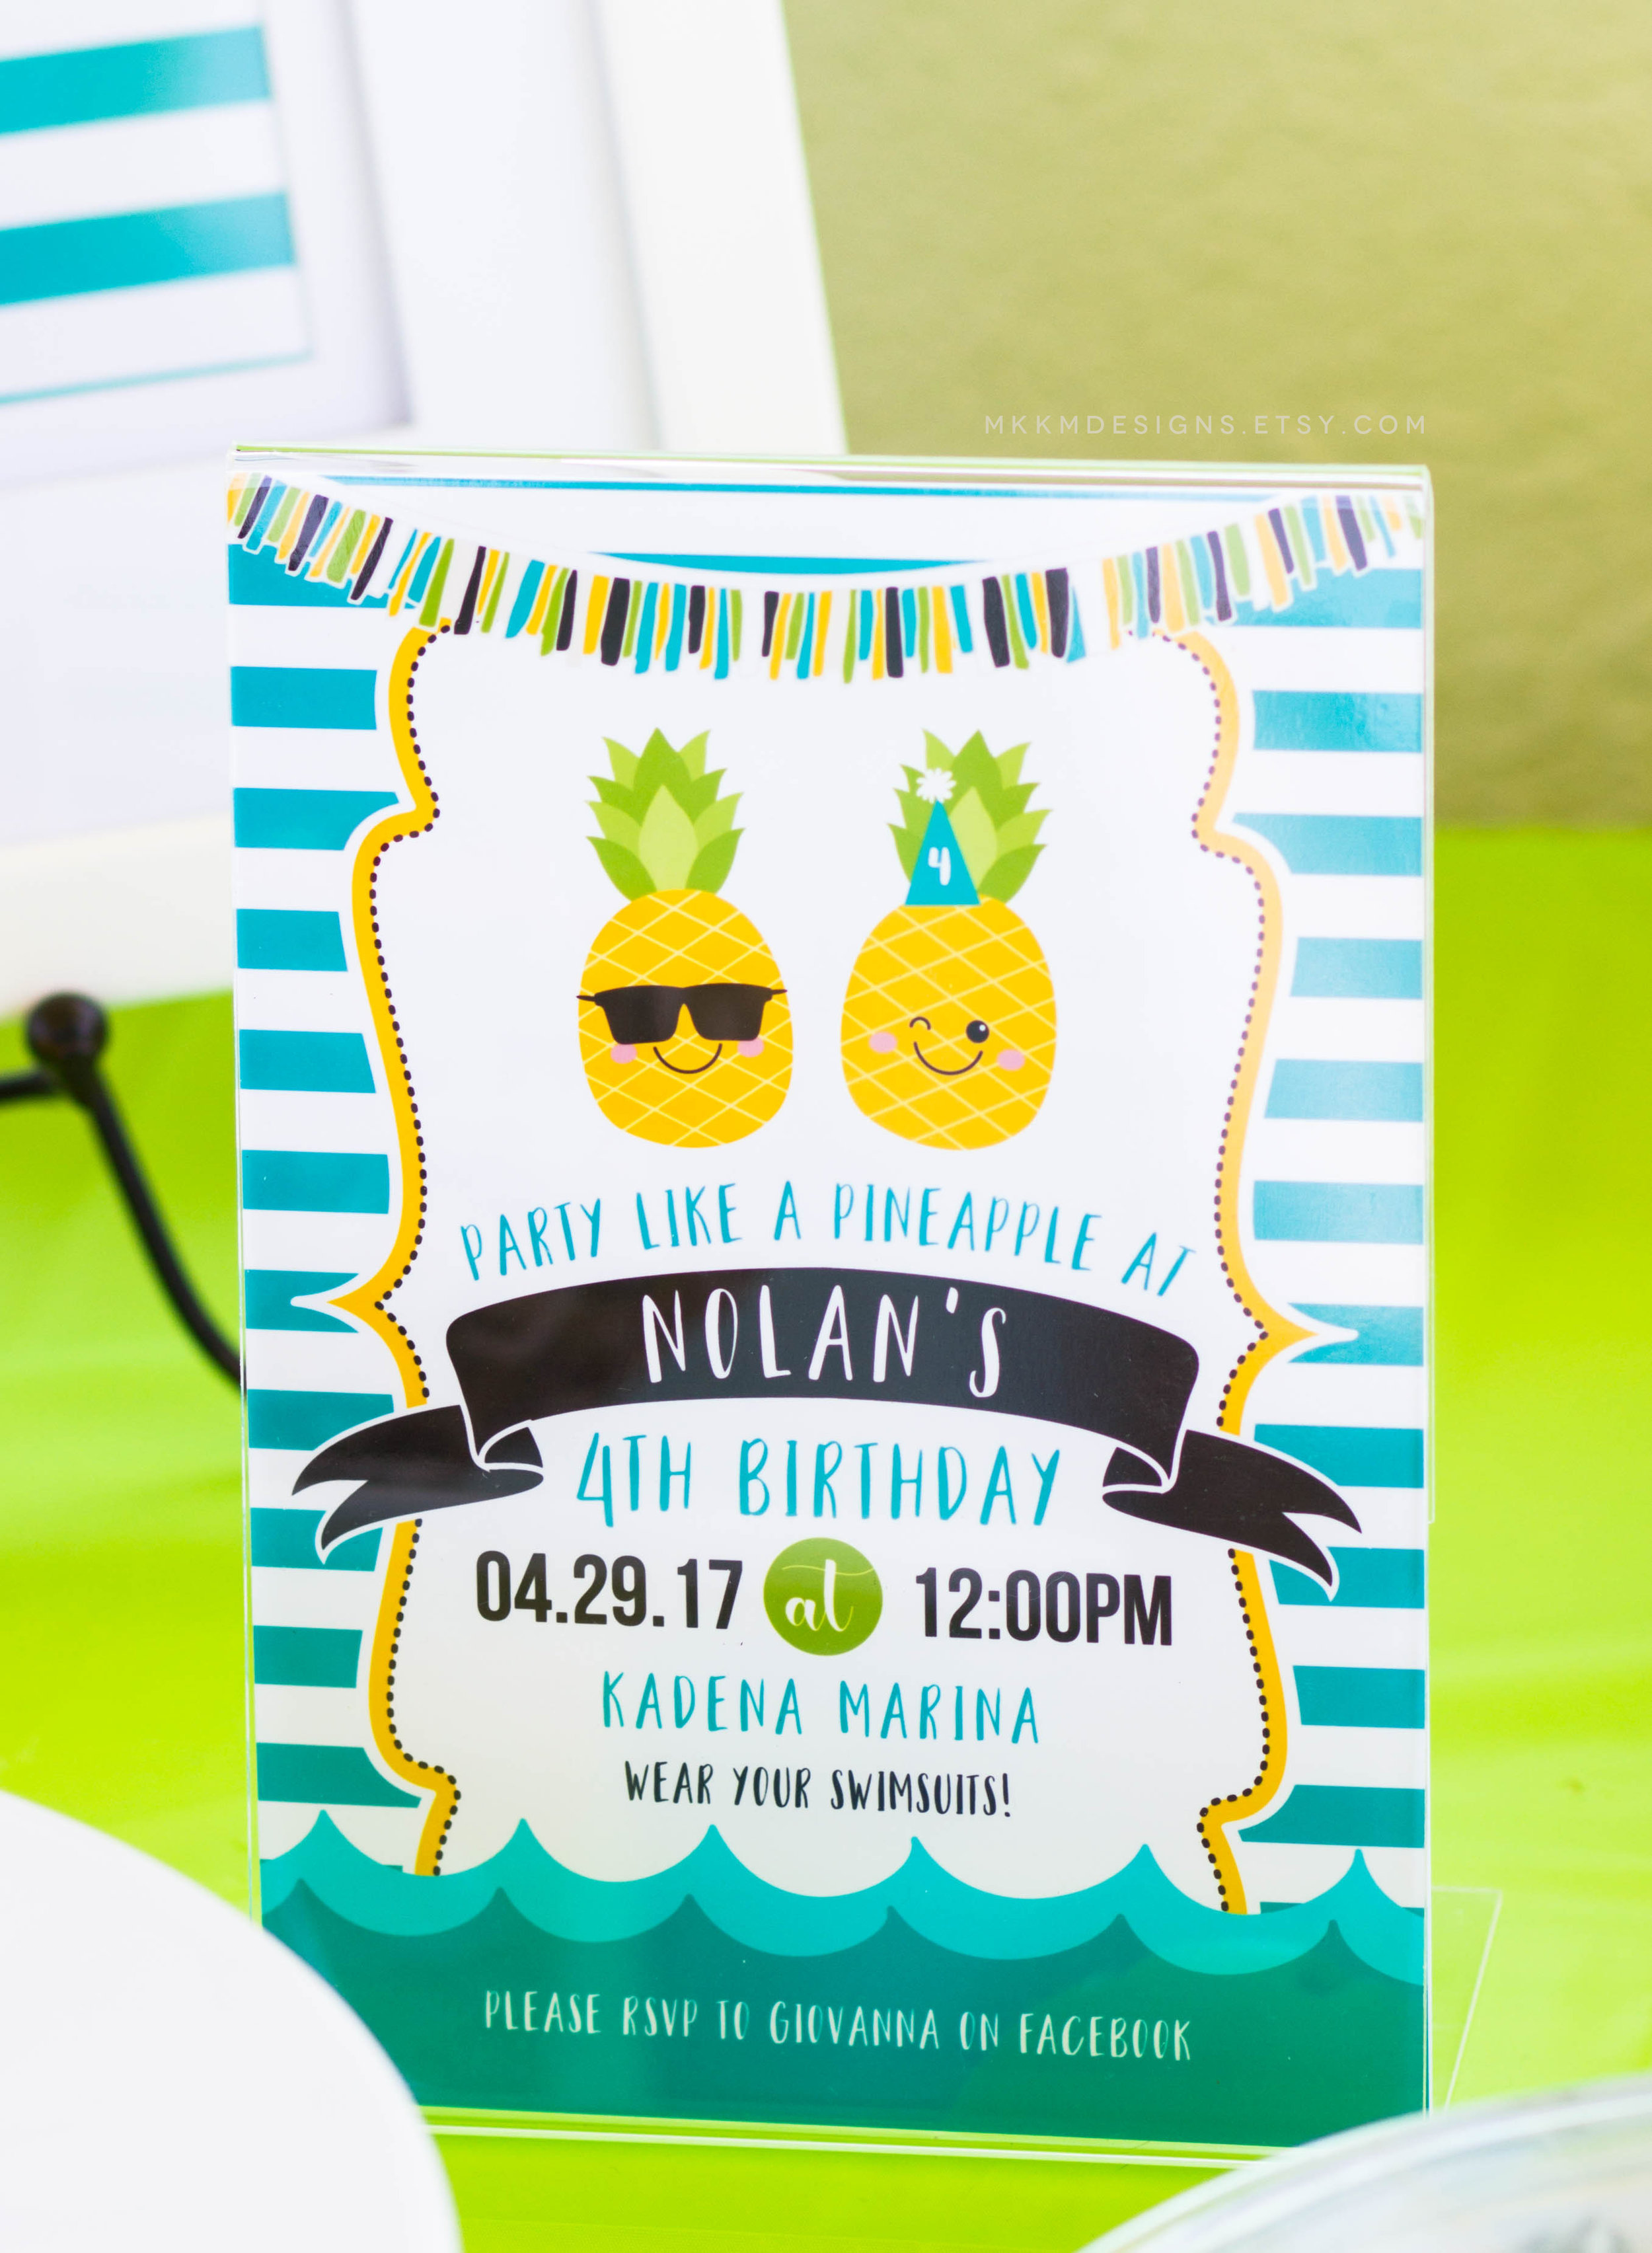 Pineapple party invitation from MKKM Designs